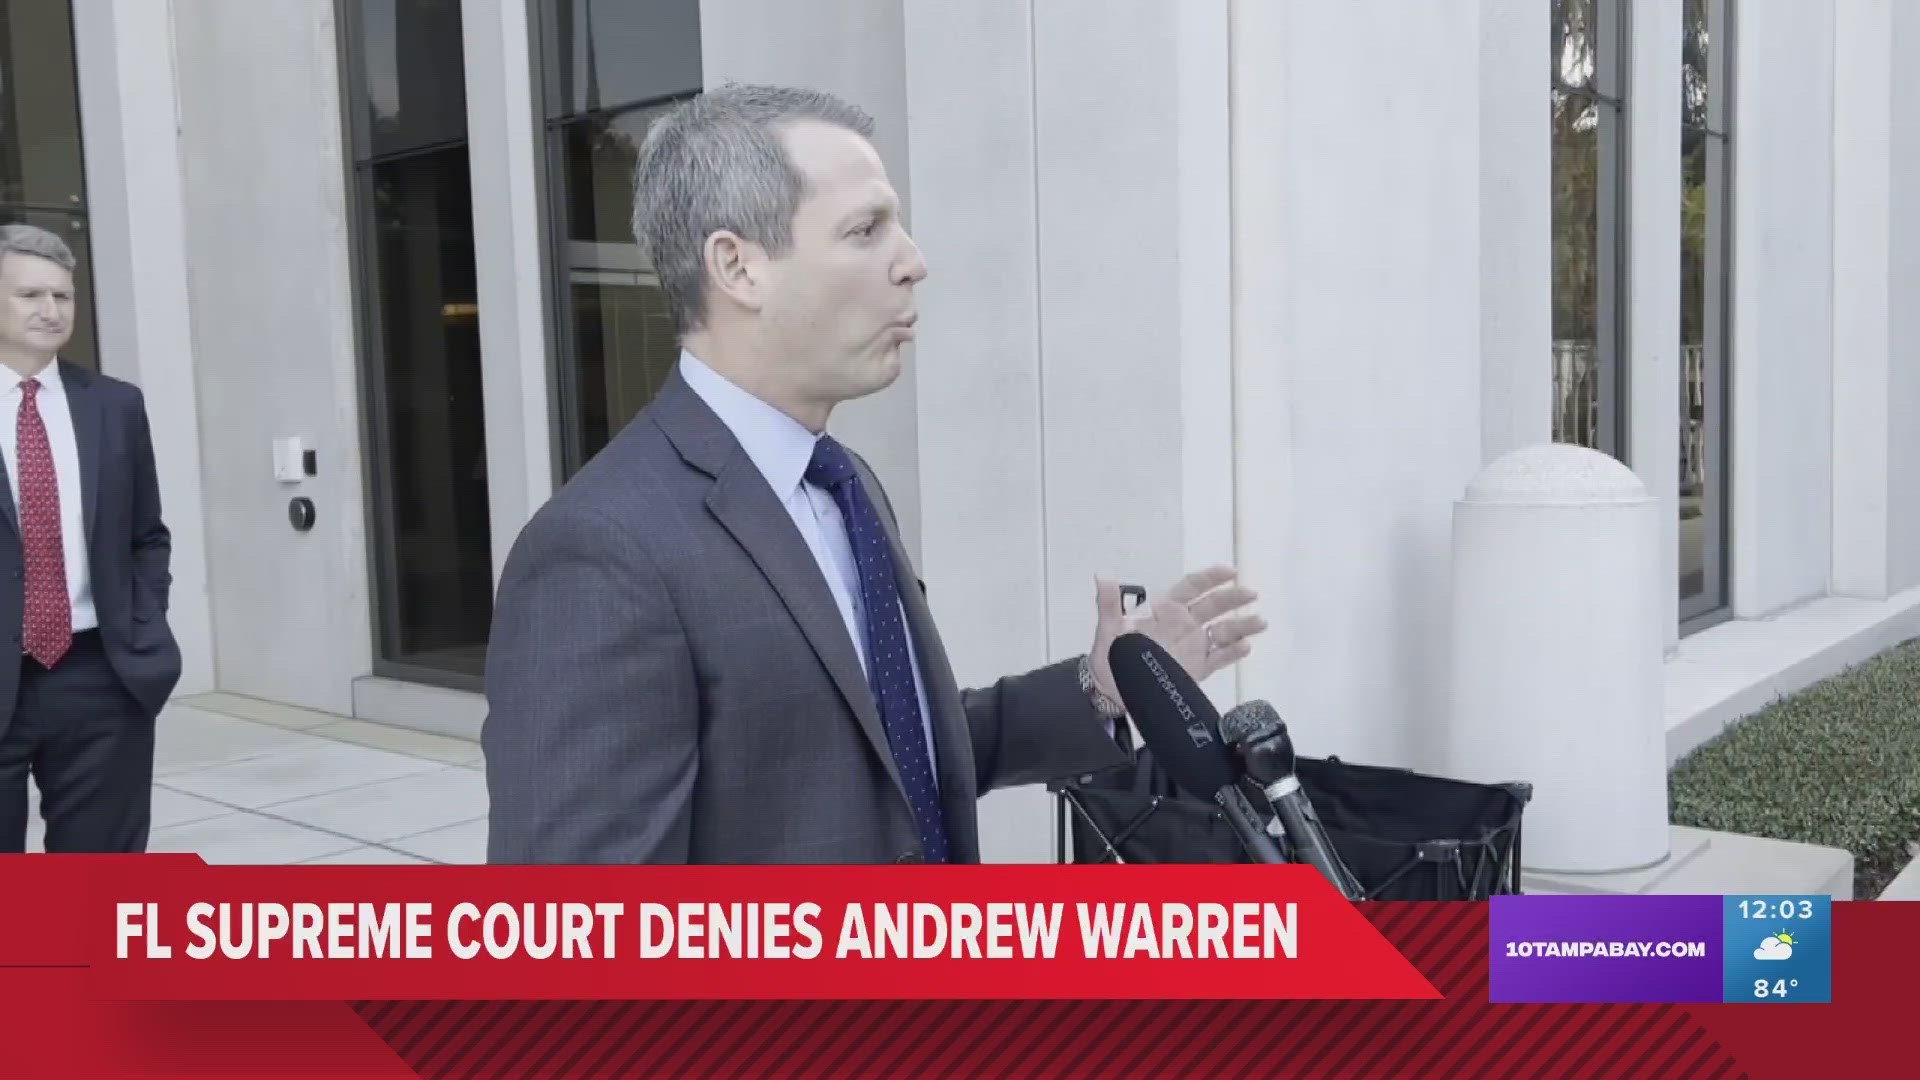 Andrew Warren was suspended by Gov. Ron DeSantis in August 2022 over claims of "neglect of duty."